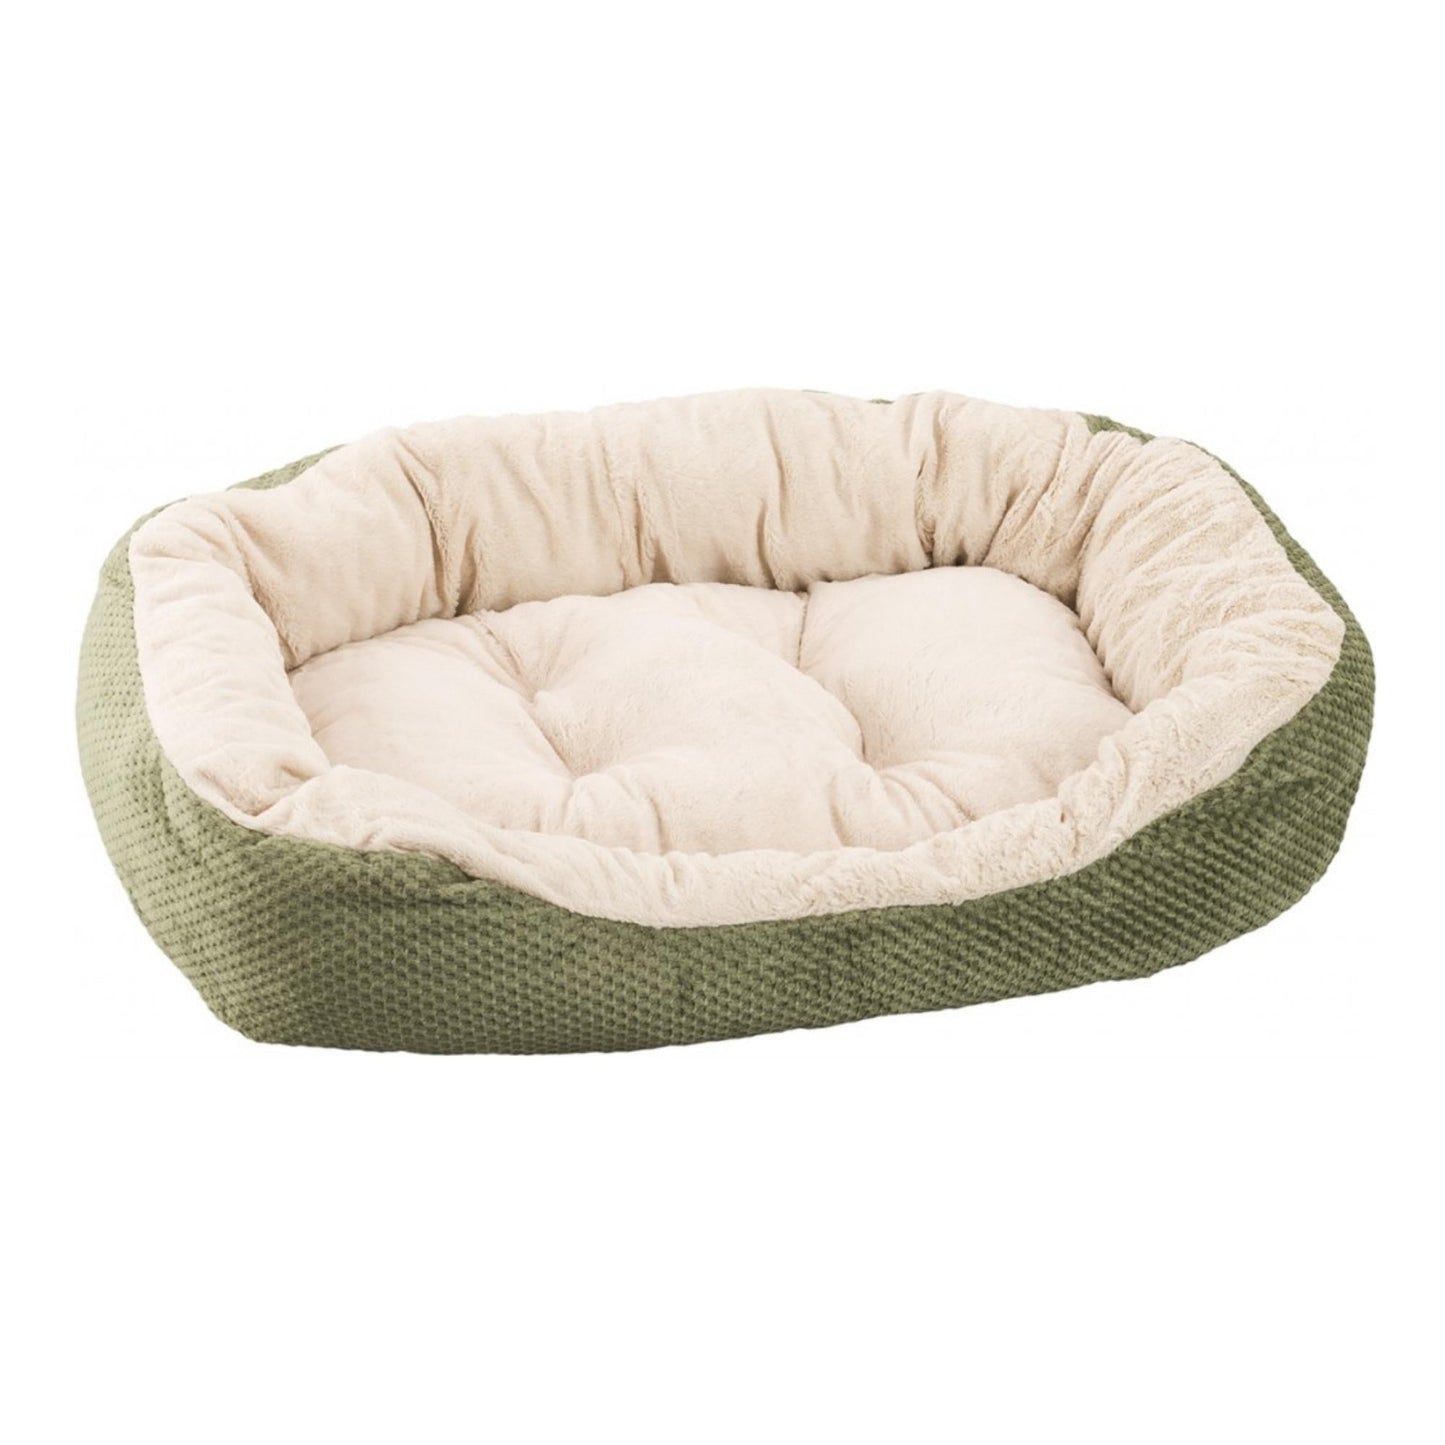 Ethical Pet Sleep Zone Checkerboard Napper 31? Sage